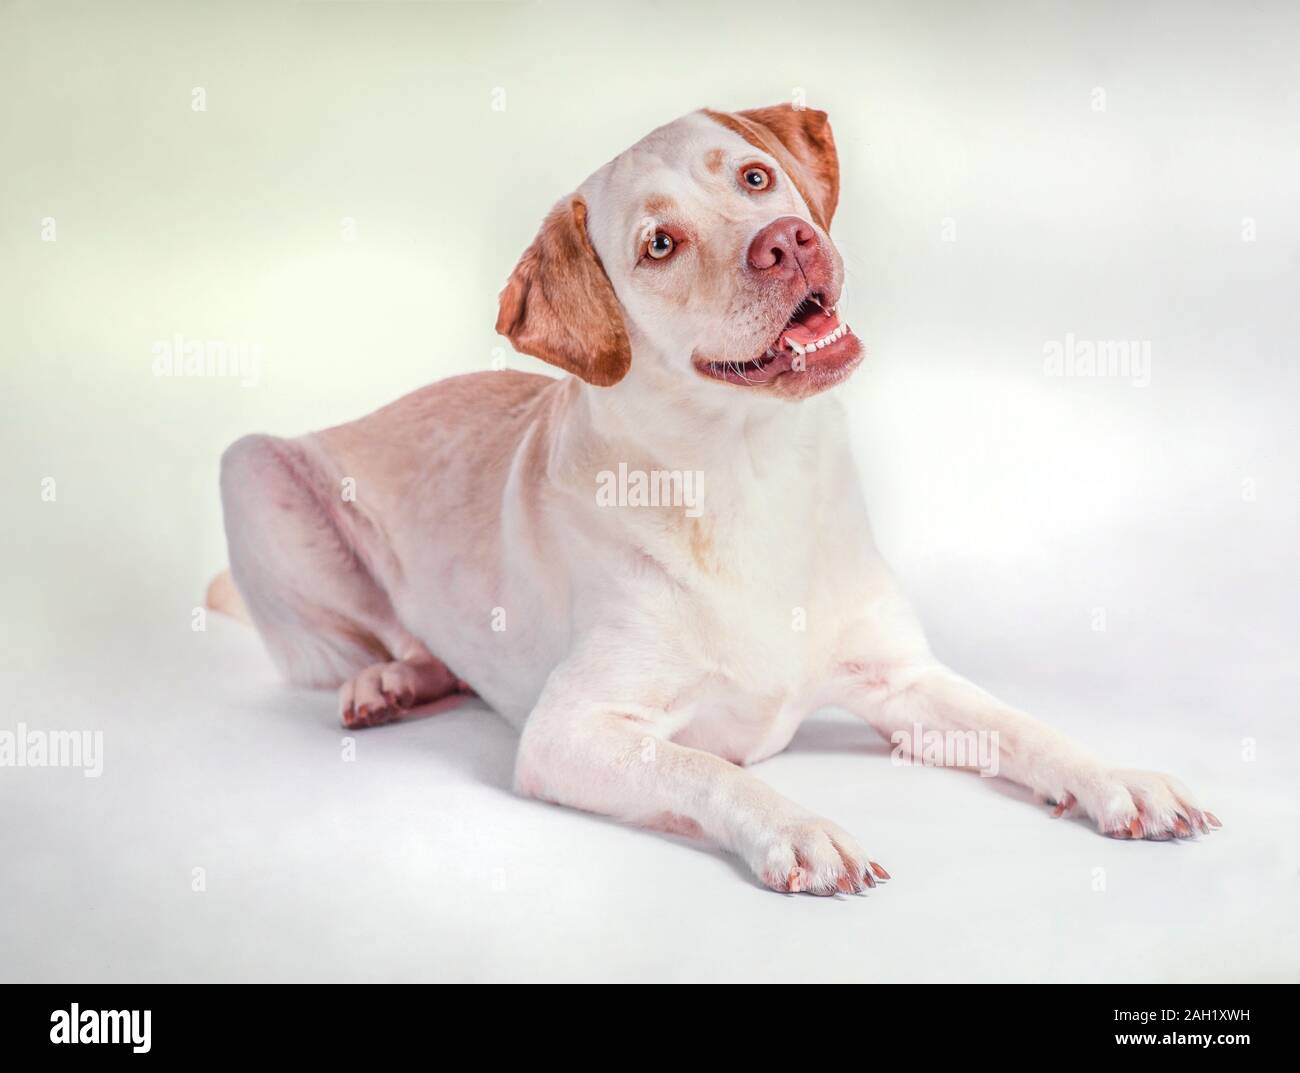 Yellow Labrador Retriever dog lying on white background Banque D'Images